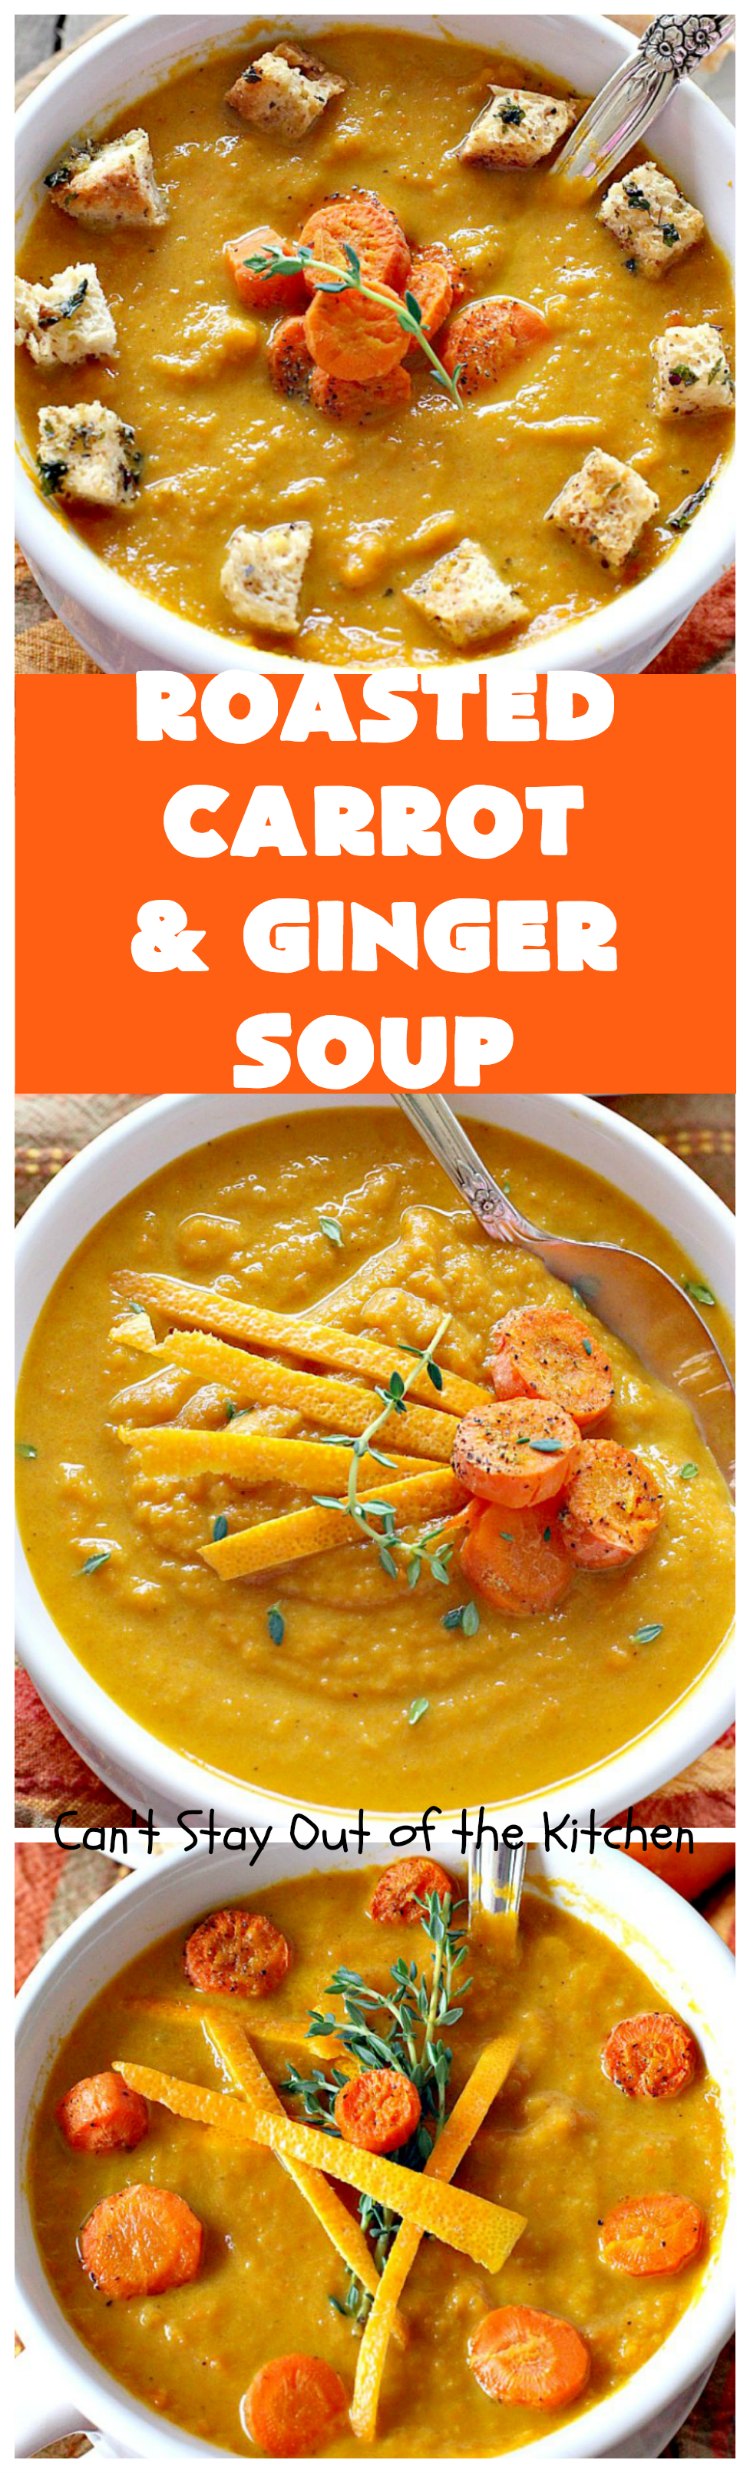 Roasted Carrot & Ginger Soup | Can't Stay Out of the Kitchen